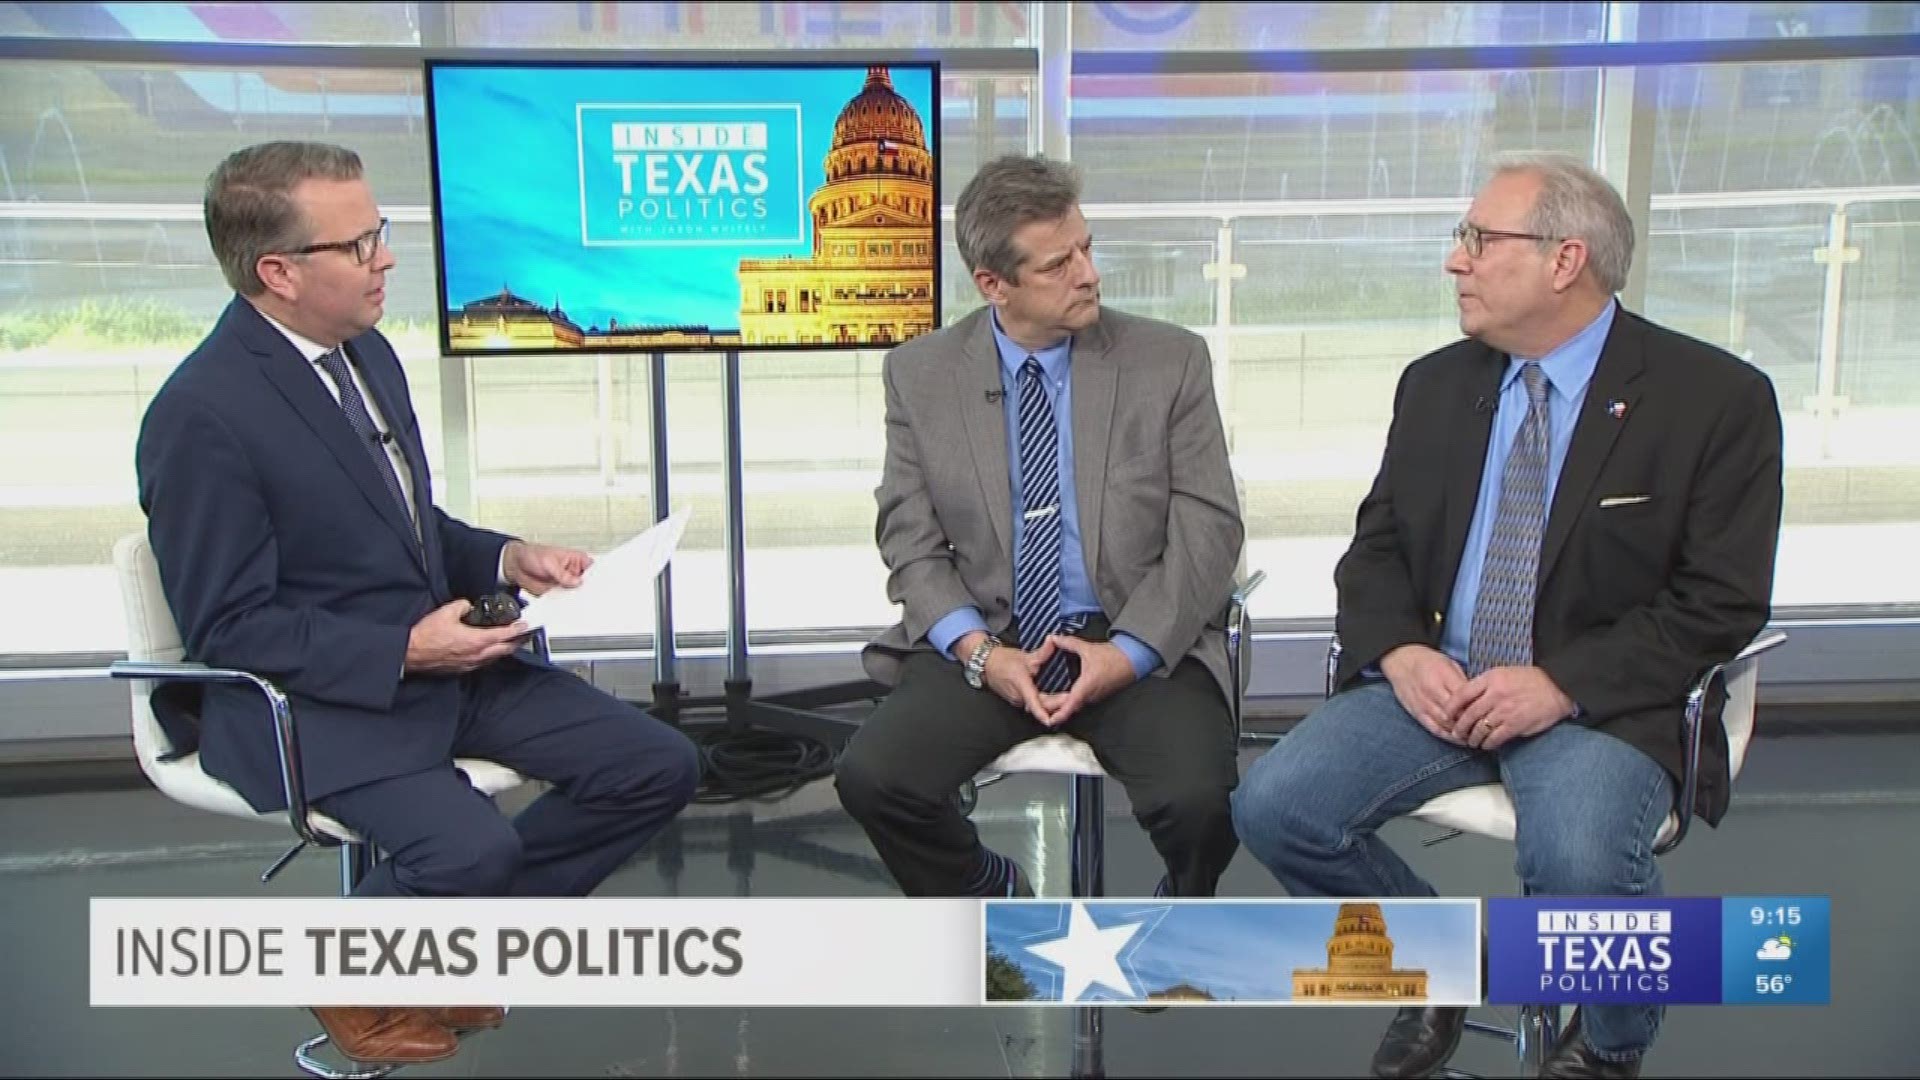 Over the next 48-hours, a flood of campaign ads will hit the airwaves as candidates make their closing arguments. Political consultants Democrat Matt Angle and Republican Vinny Minchillo joined host Jason Whitely to discuss the candidates' messaging and m